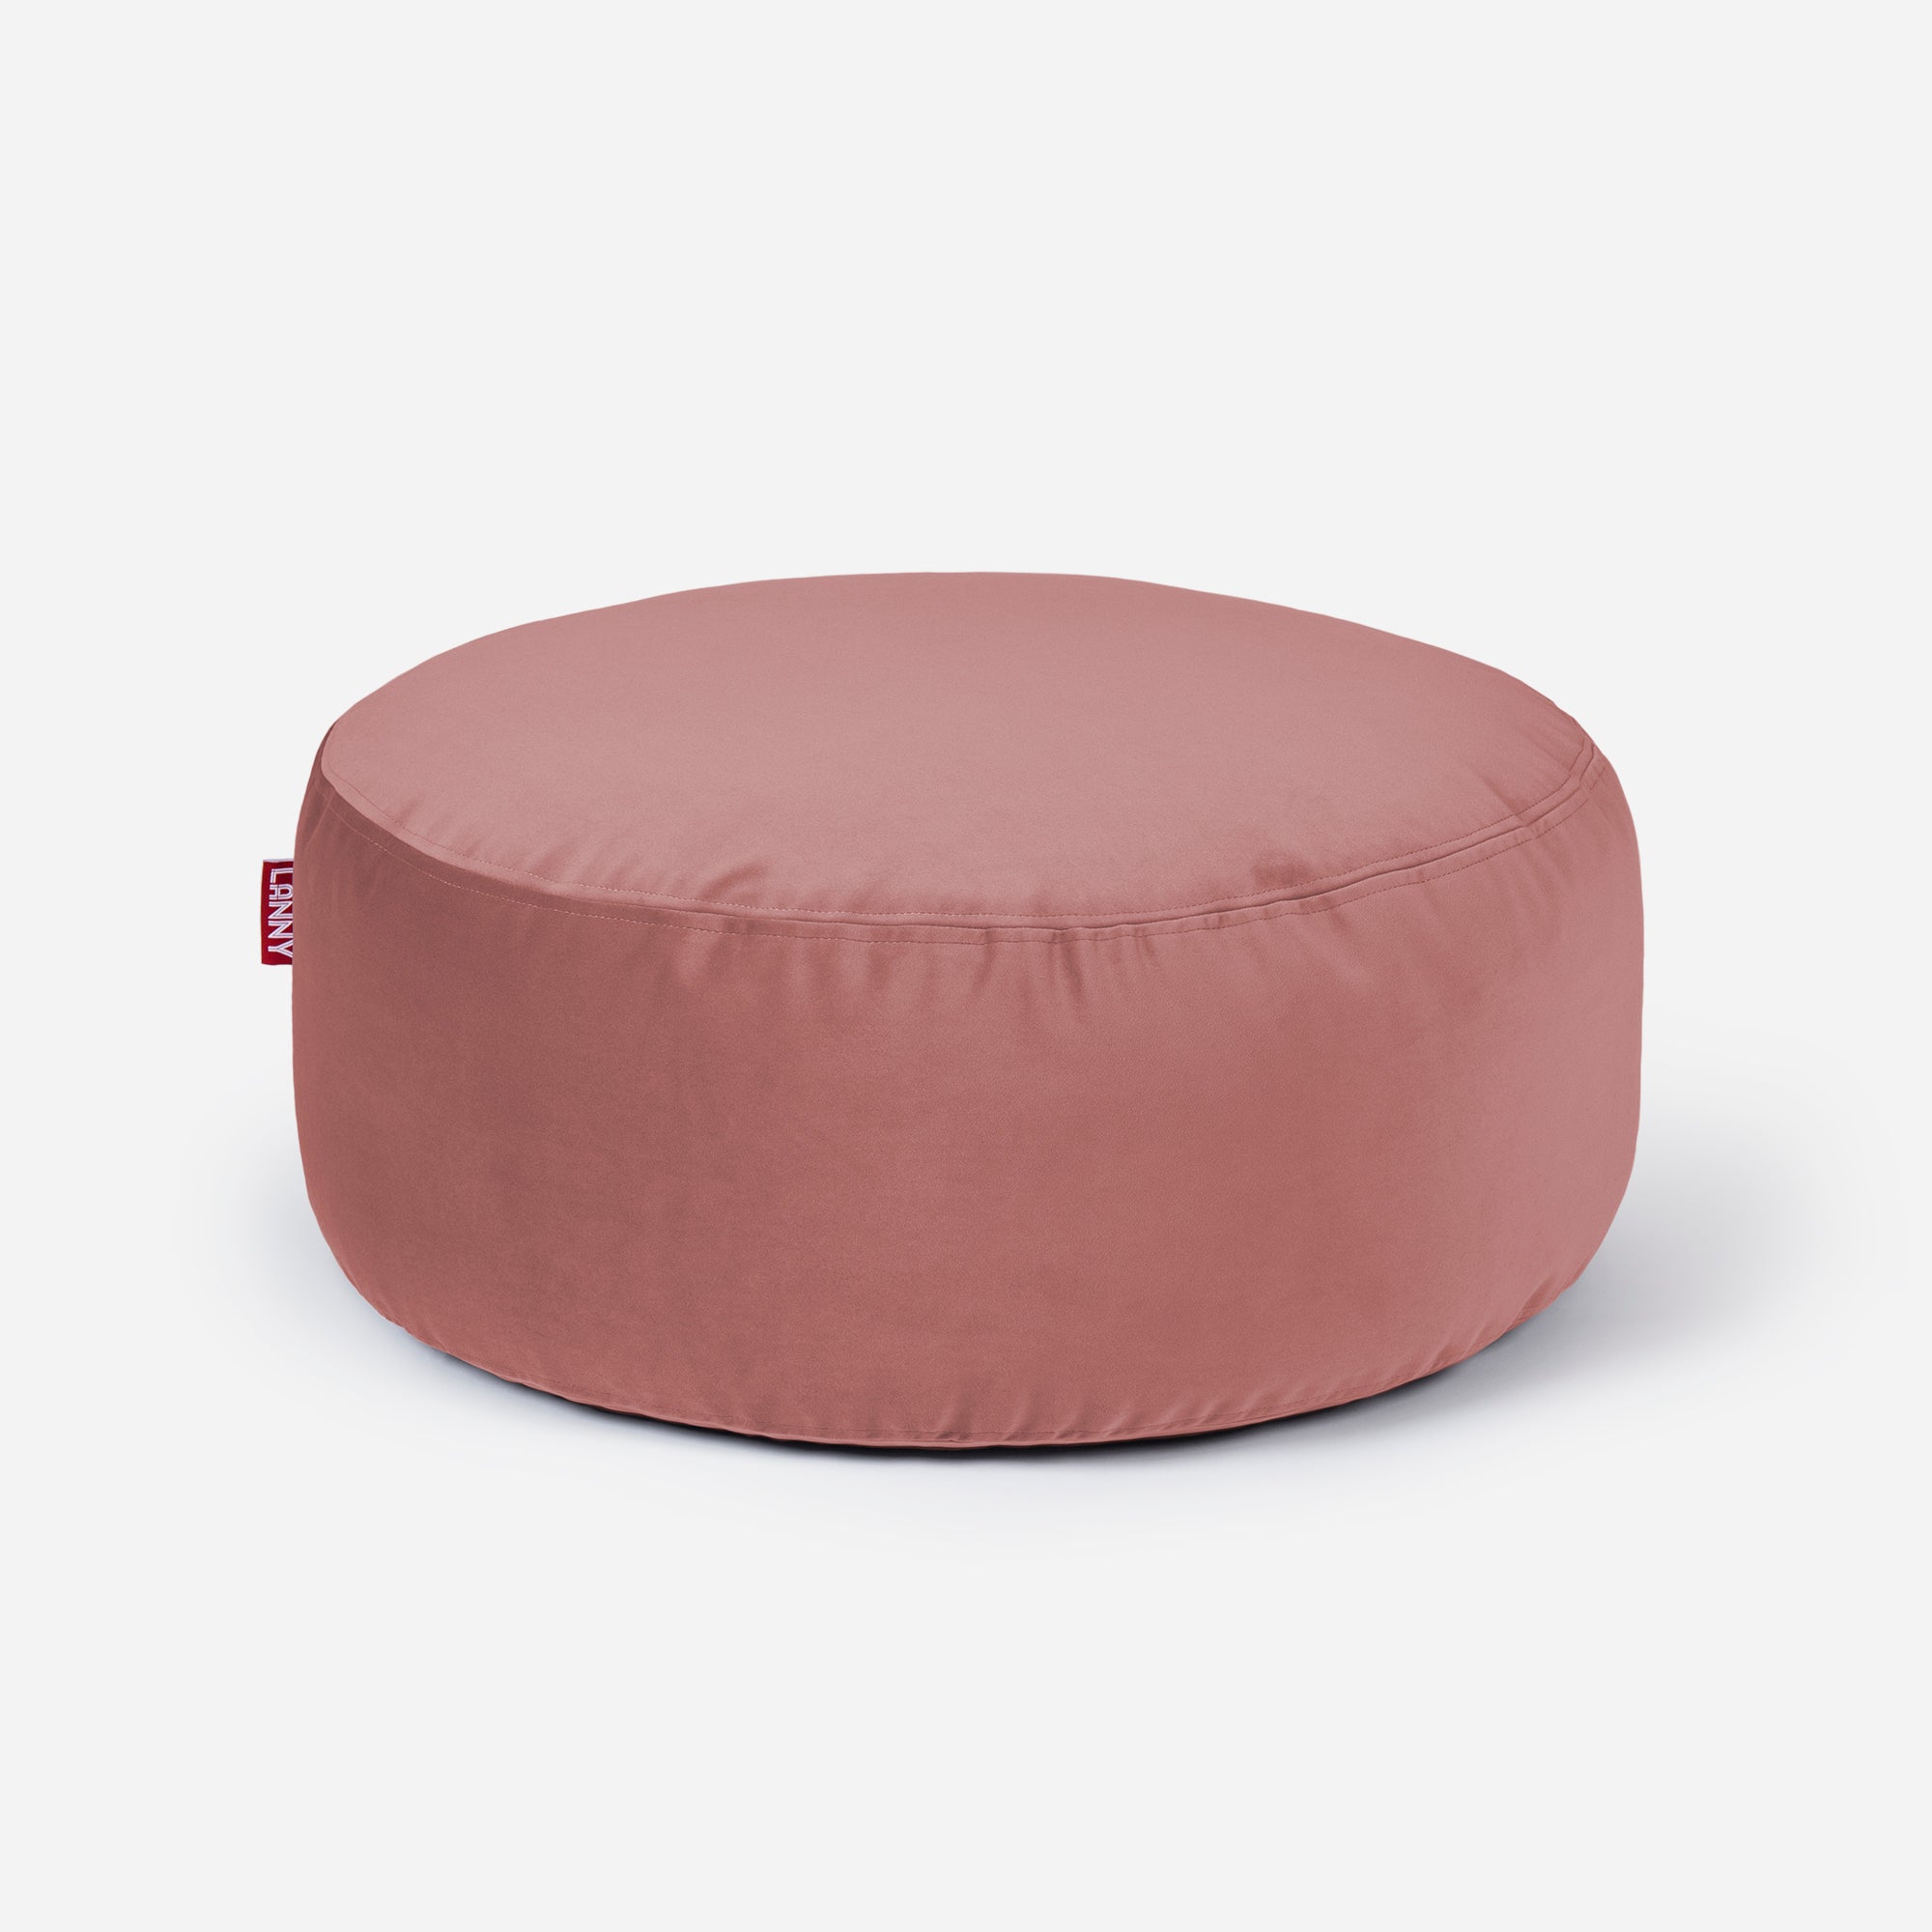 Lanny pouf made from velvet fabric in Pink color